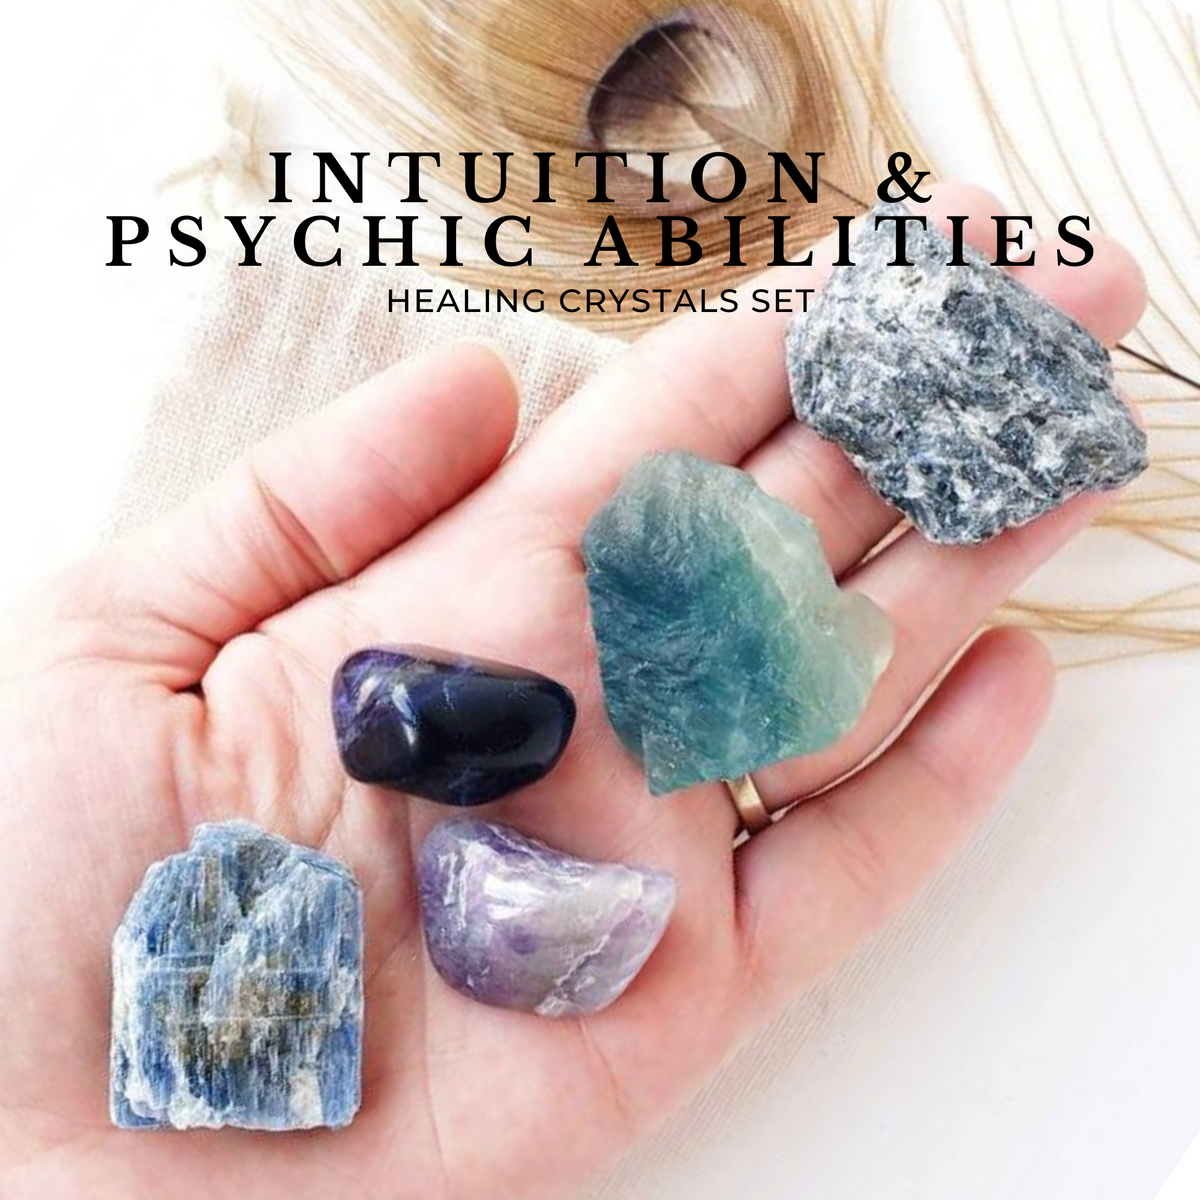 INTUITION & PSYCHIC ABILITIES crystal set for third eye chakra activation, divination crystals, witchcraft, spell & meditation. Labradorite, Amethyst, Fluorite, Sodalite, Blue Kyanite. 